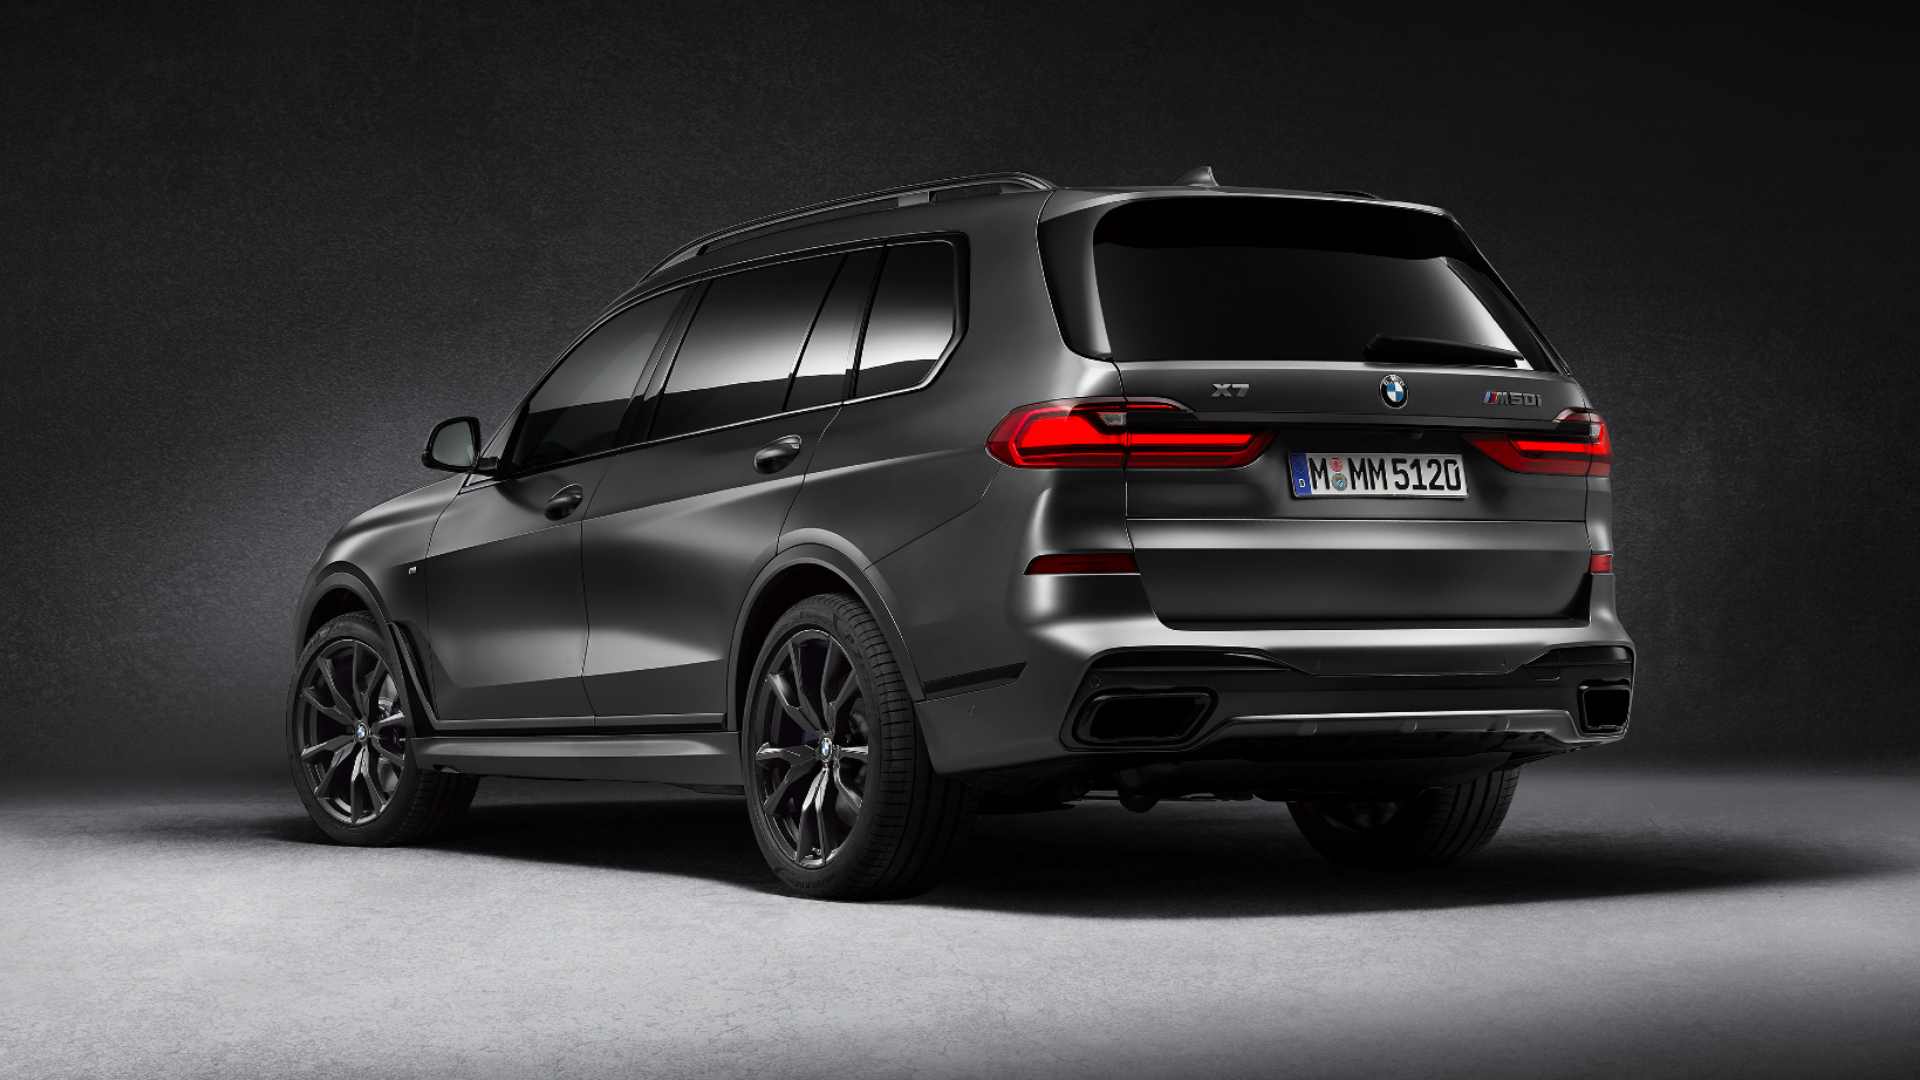 With 530 hp on tap, the BMW X7 Dark Shadow will do 0-100 kph in a claimed 5.4 seconds. Image: BMW